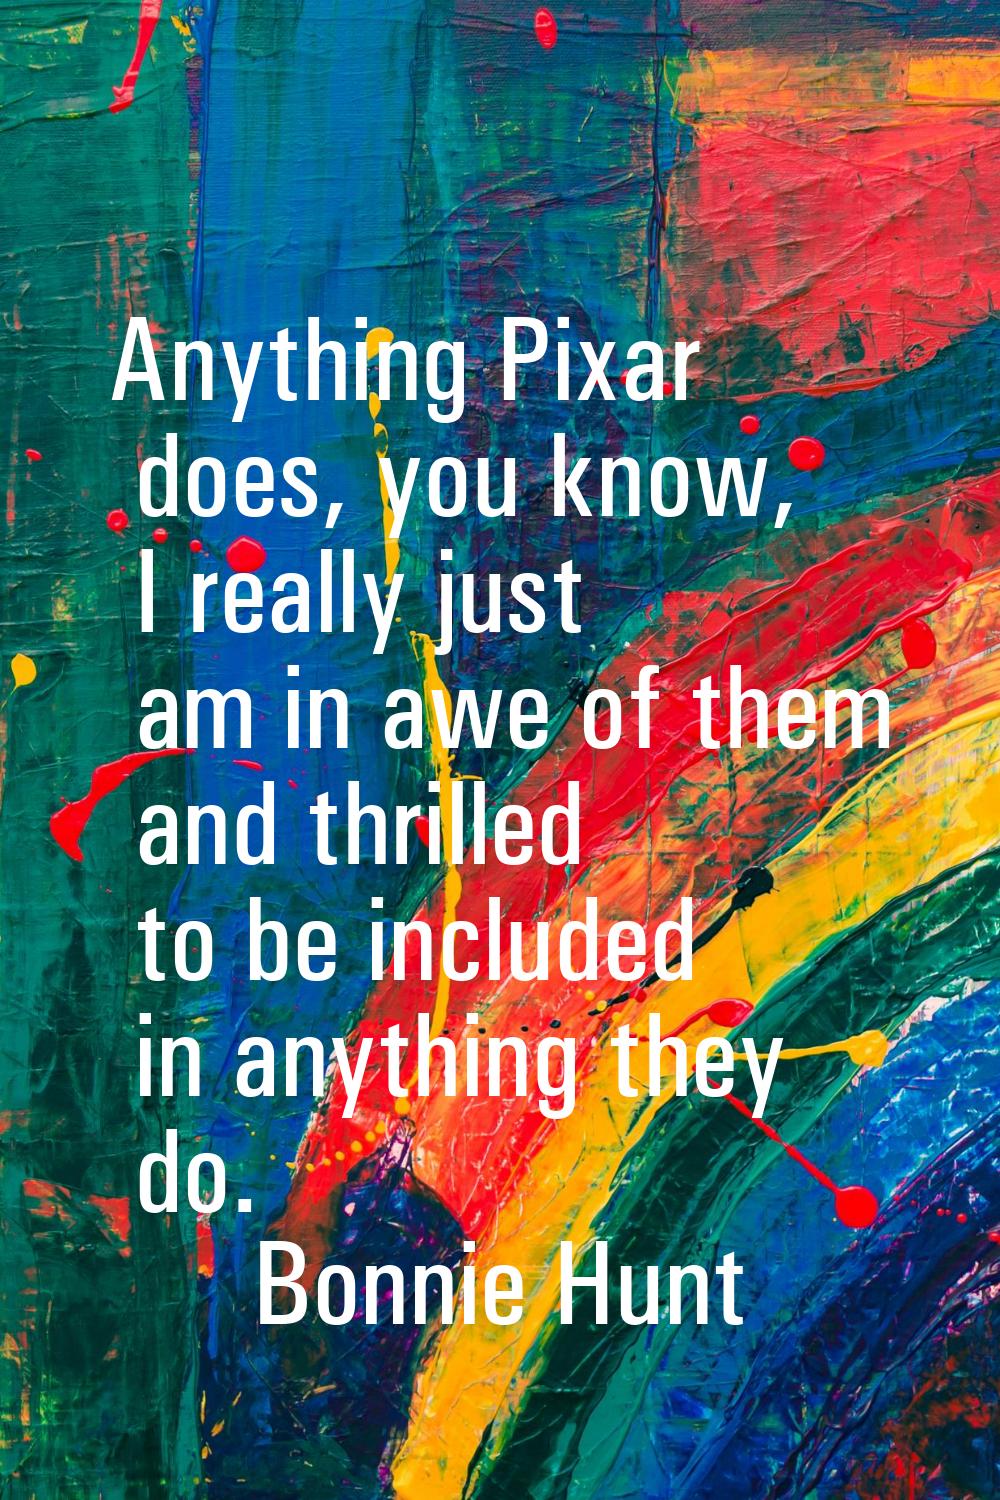 Anything Pixar does, you know, I really just am in awe of them and thrilled to be included in anyth